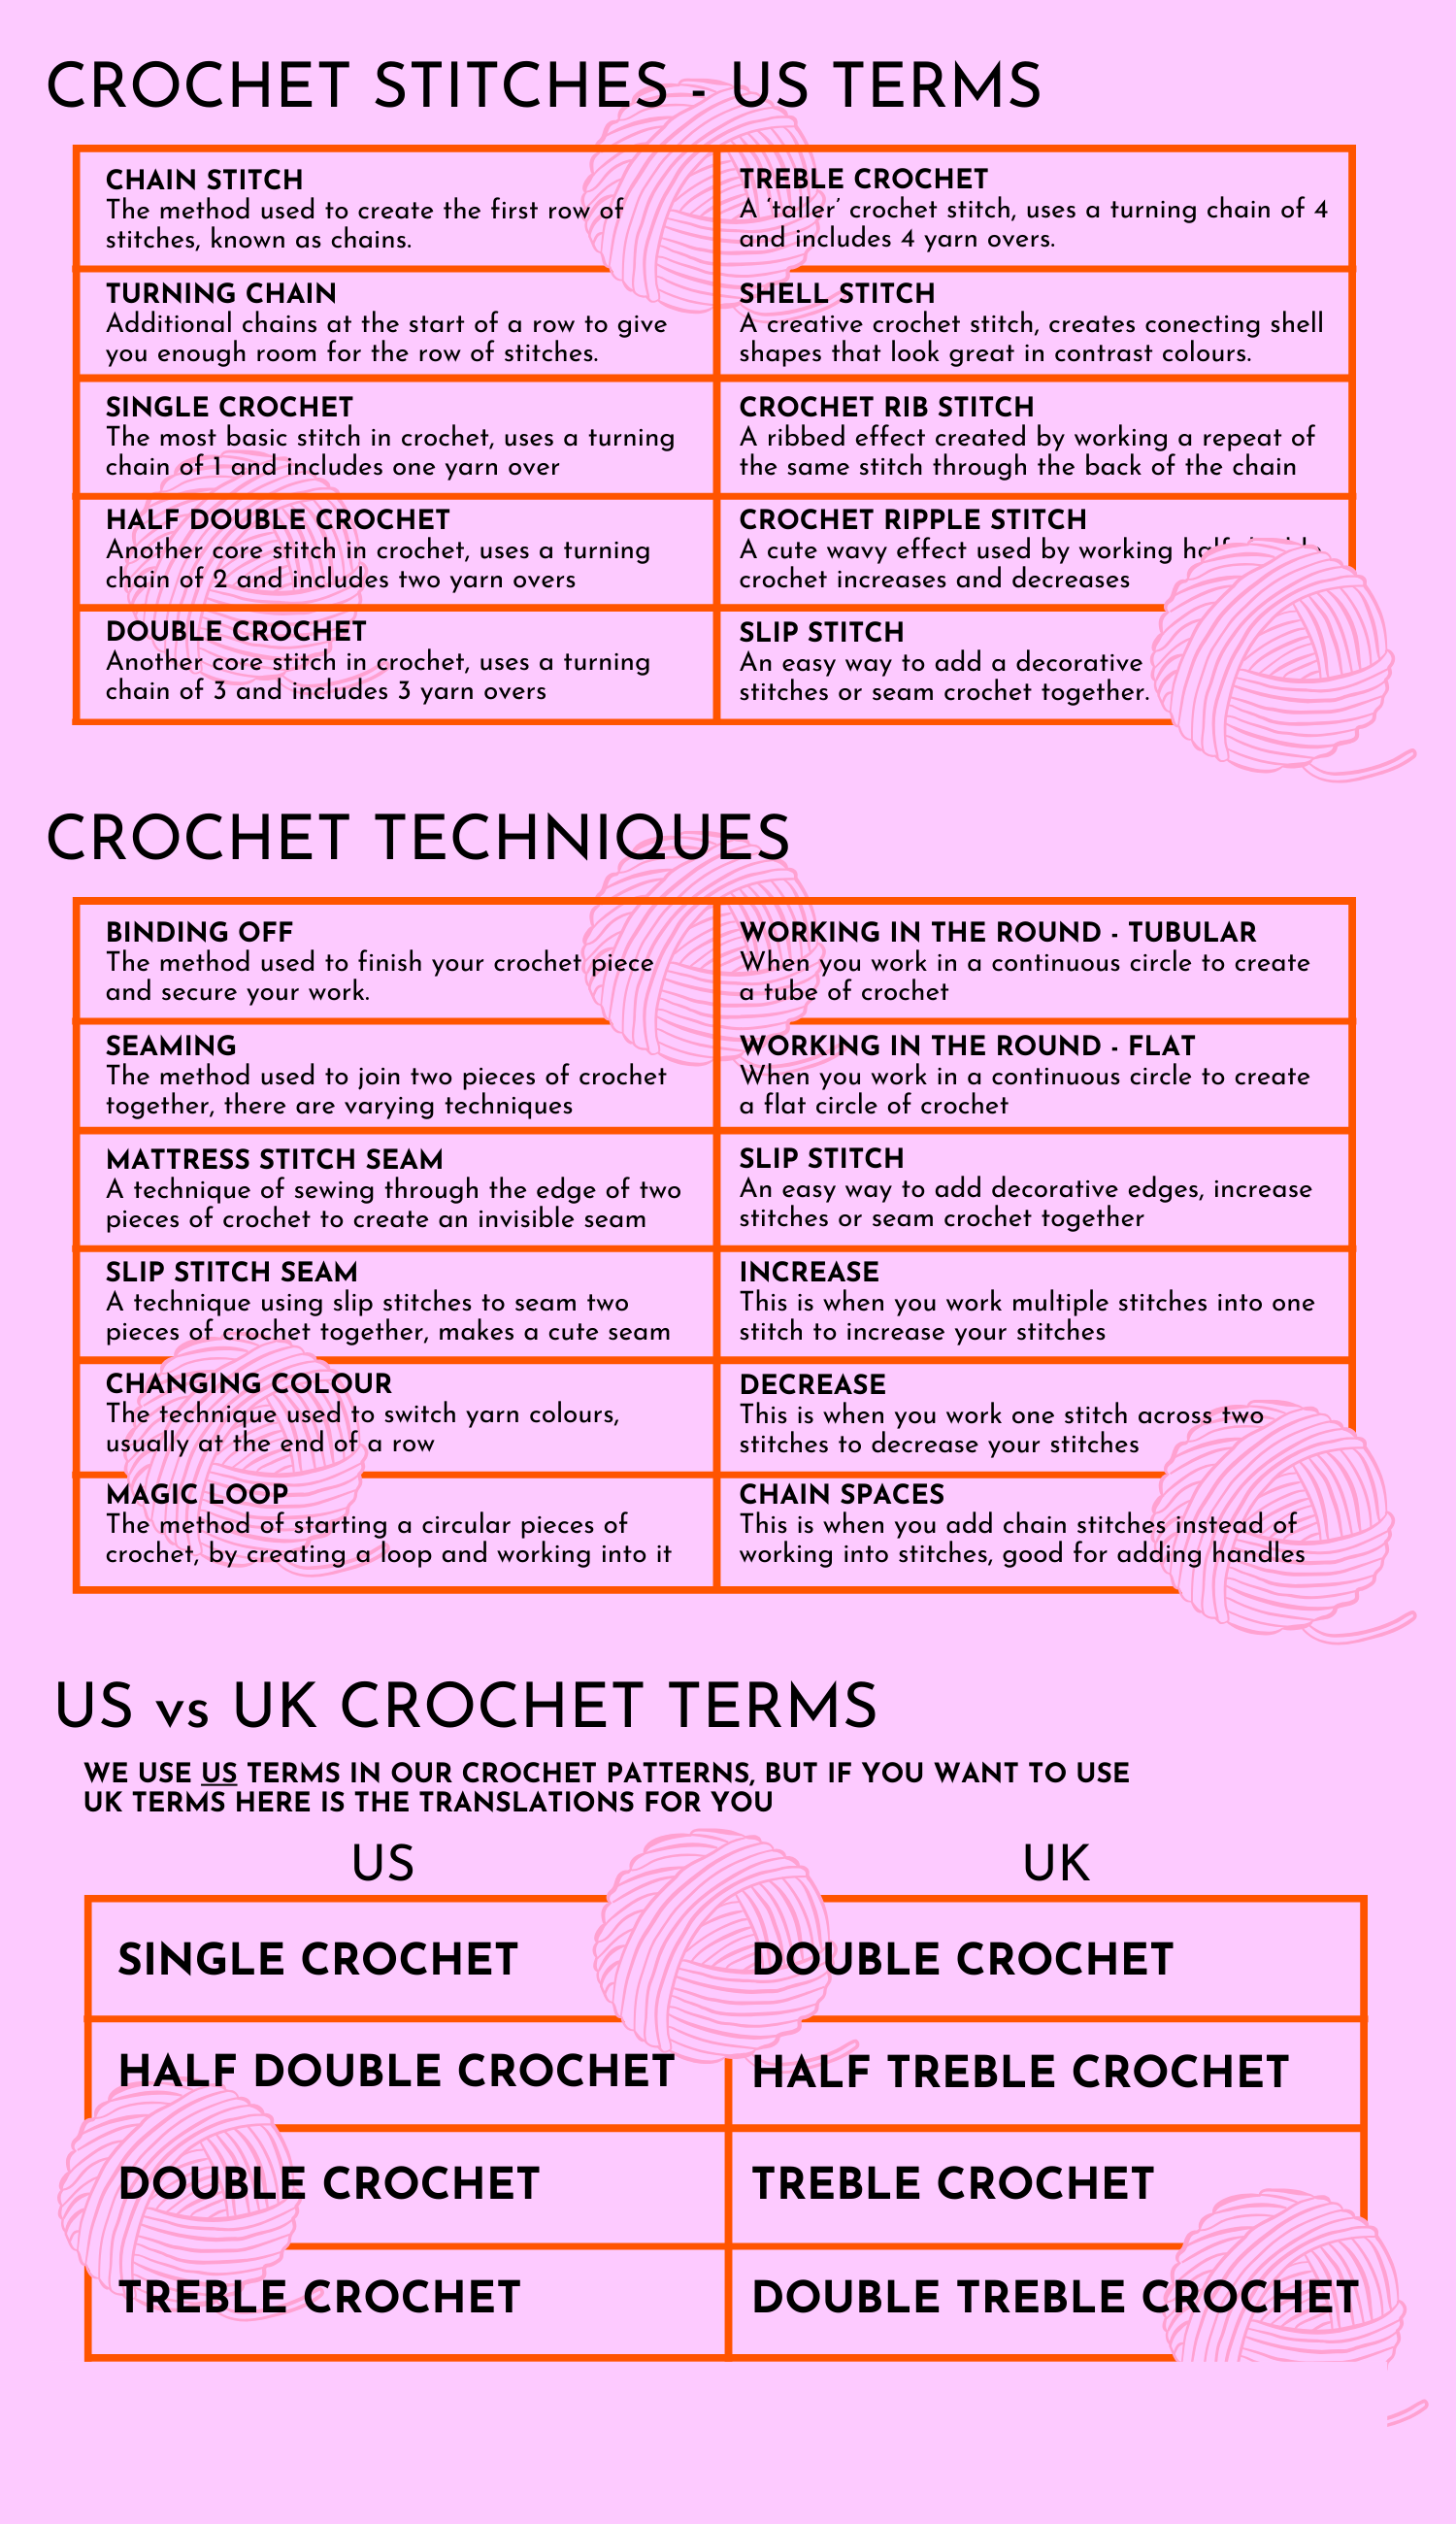 Crochet dictionary, crochet stitches, crochet techniques and US to UK conversions